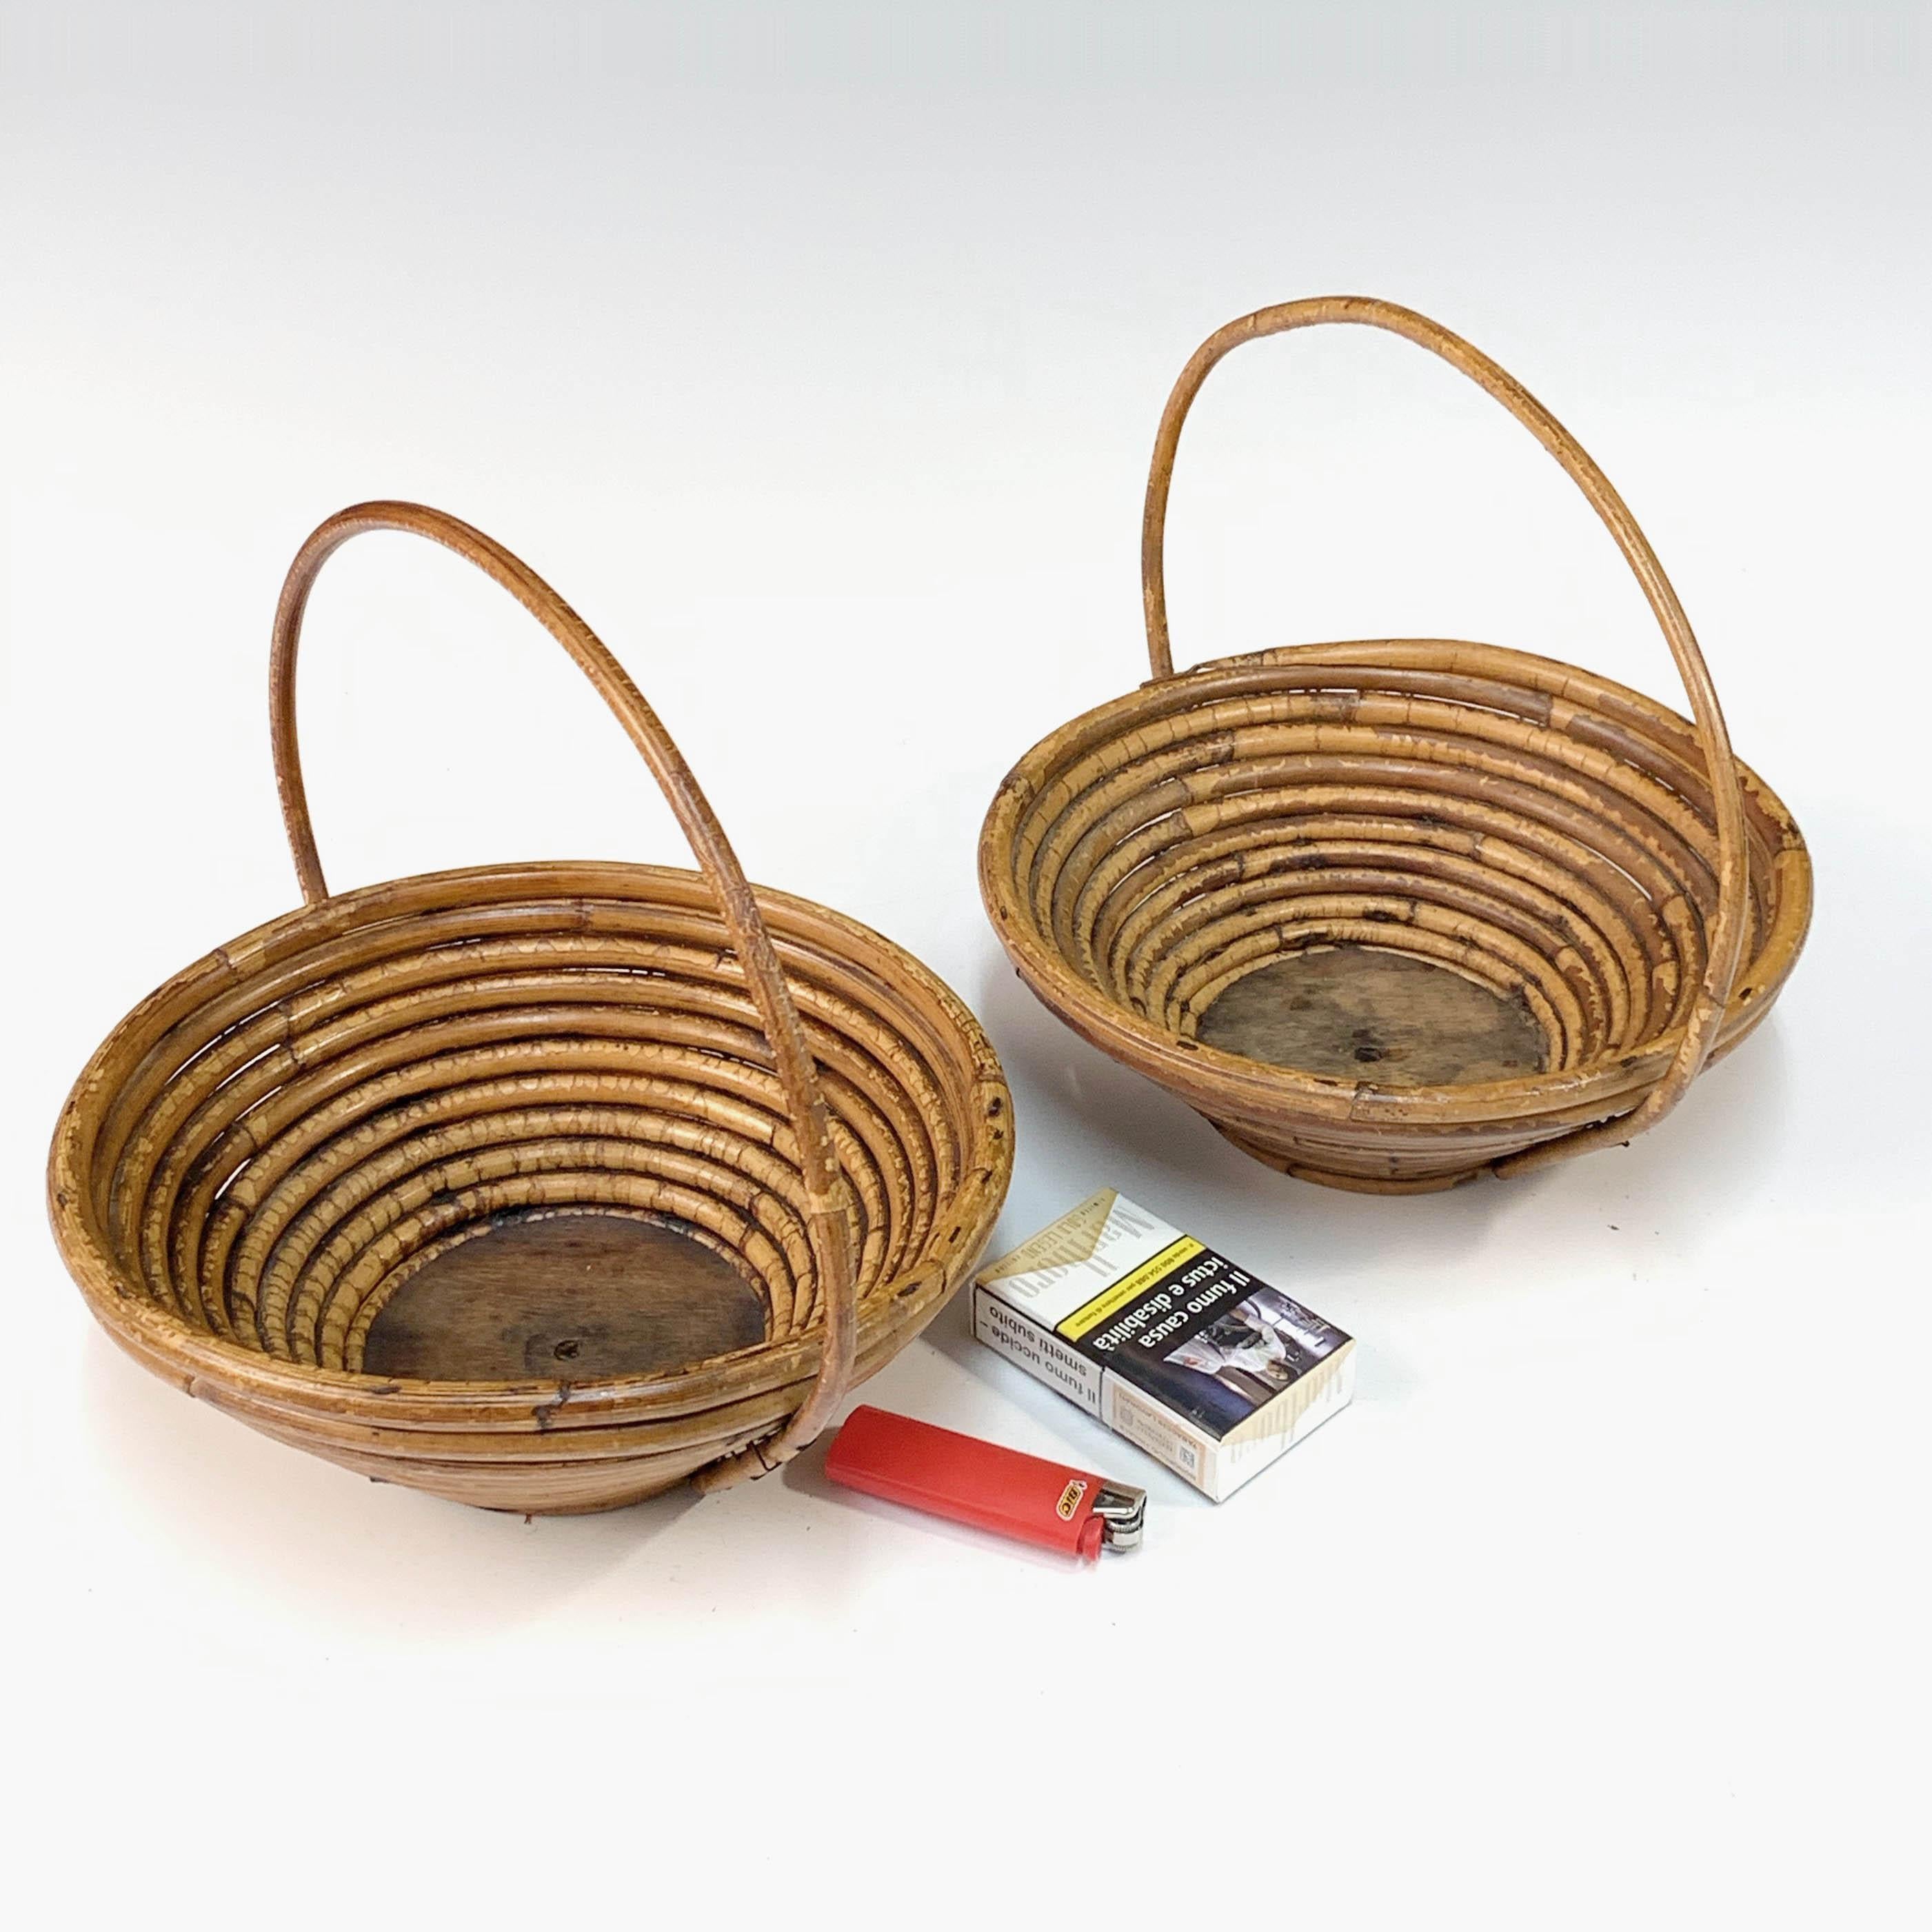 Pair of Bamboo and Rattan Midcentury Bowls, 1970s For Sale 3